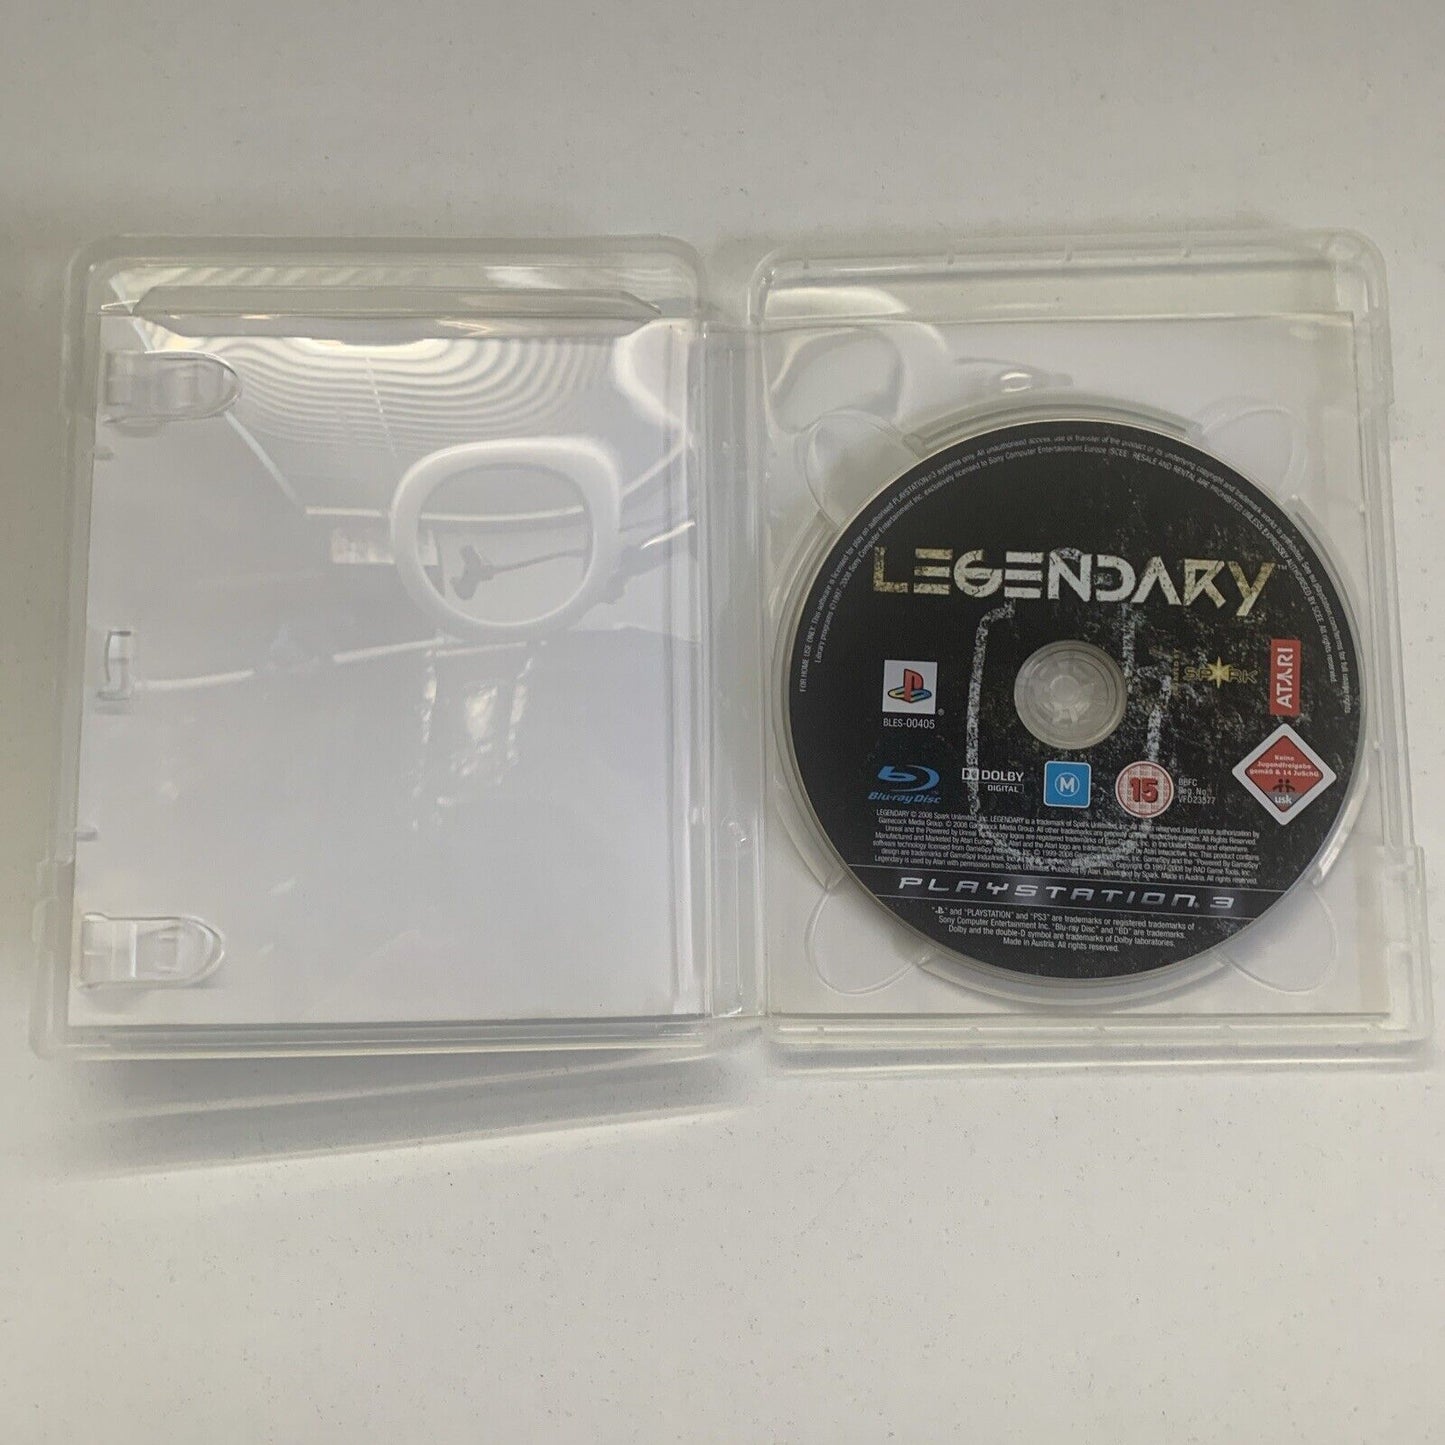 Legendary PlayStation 3 PS3 Game